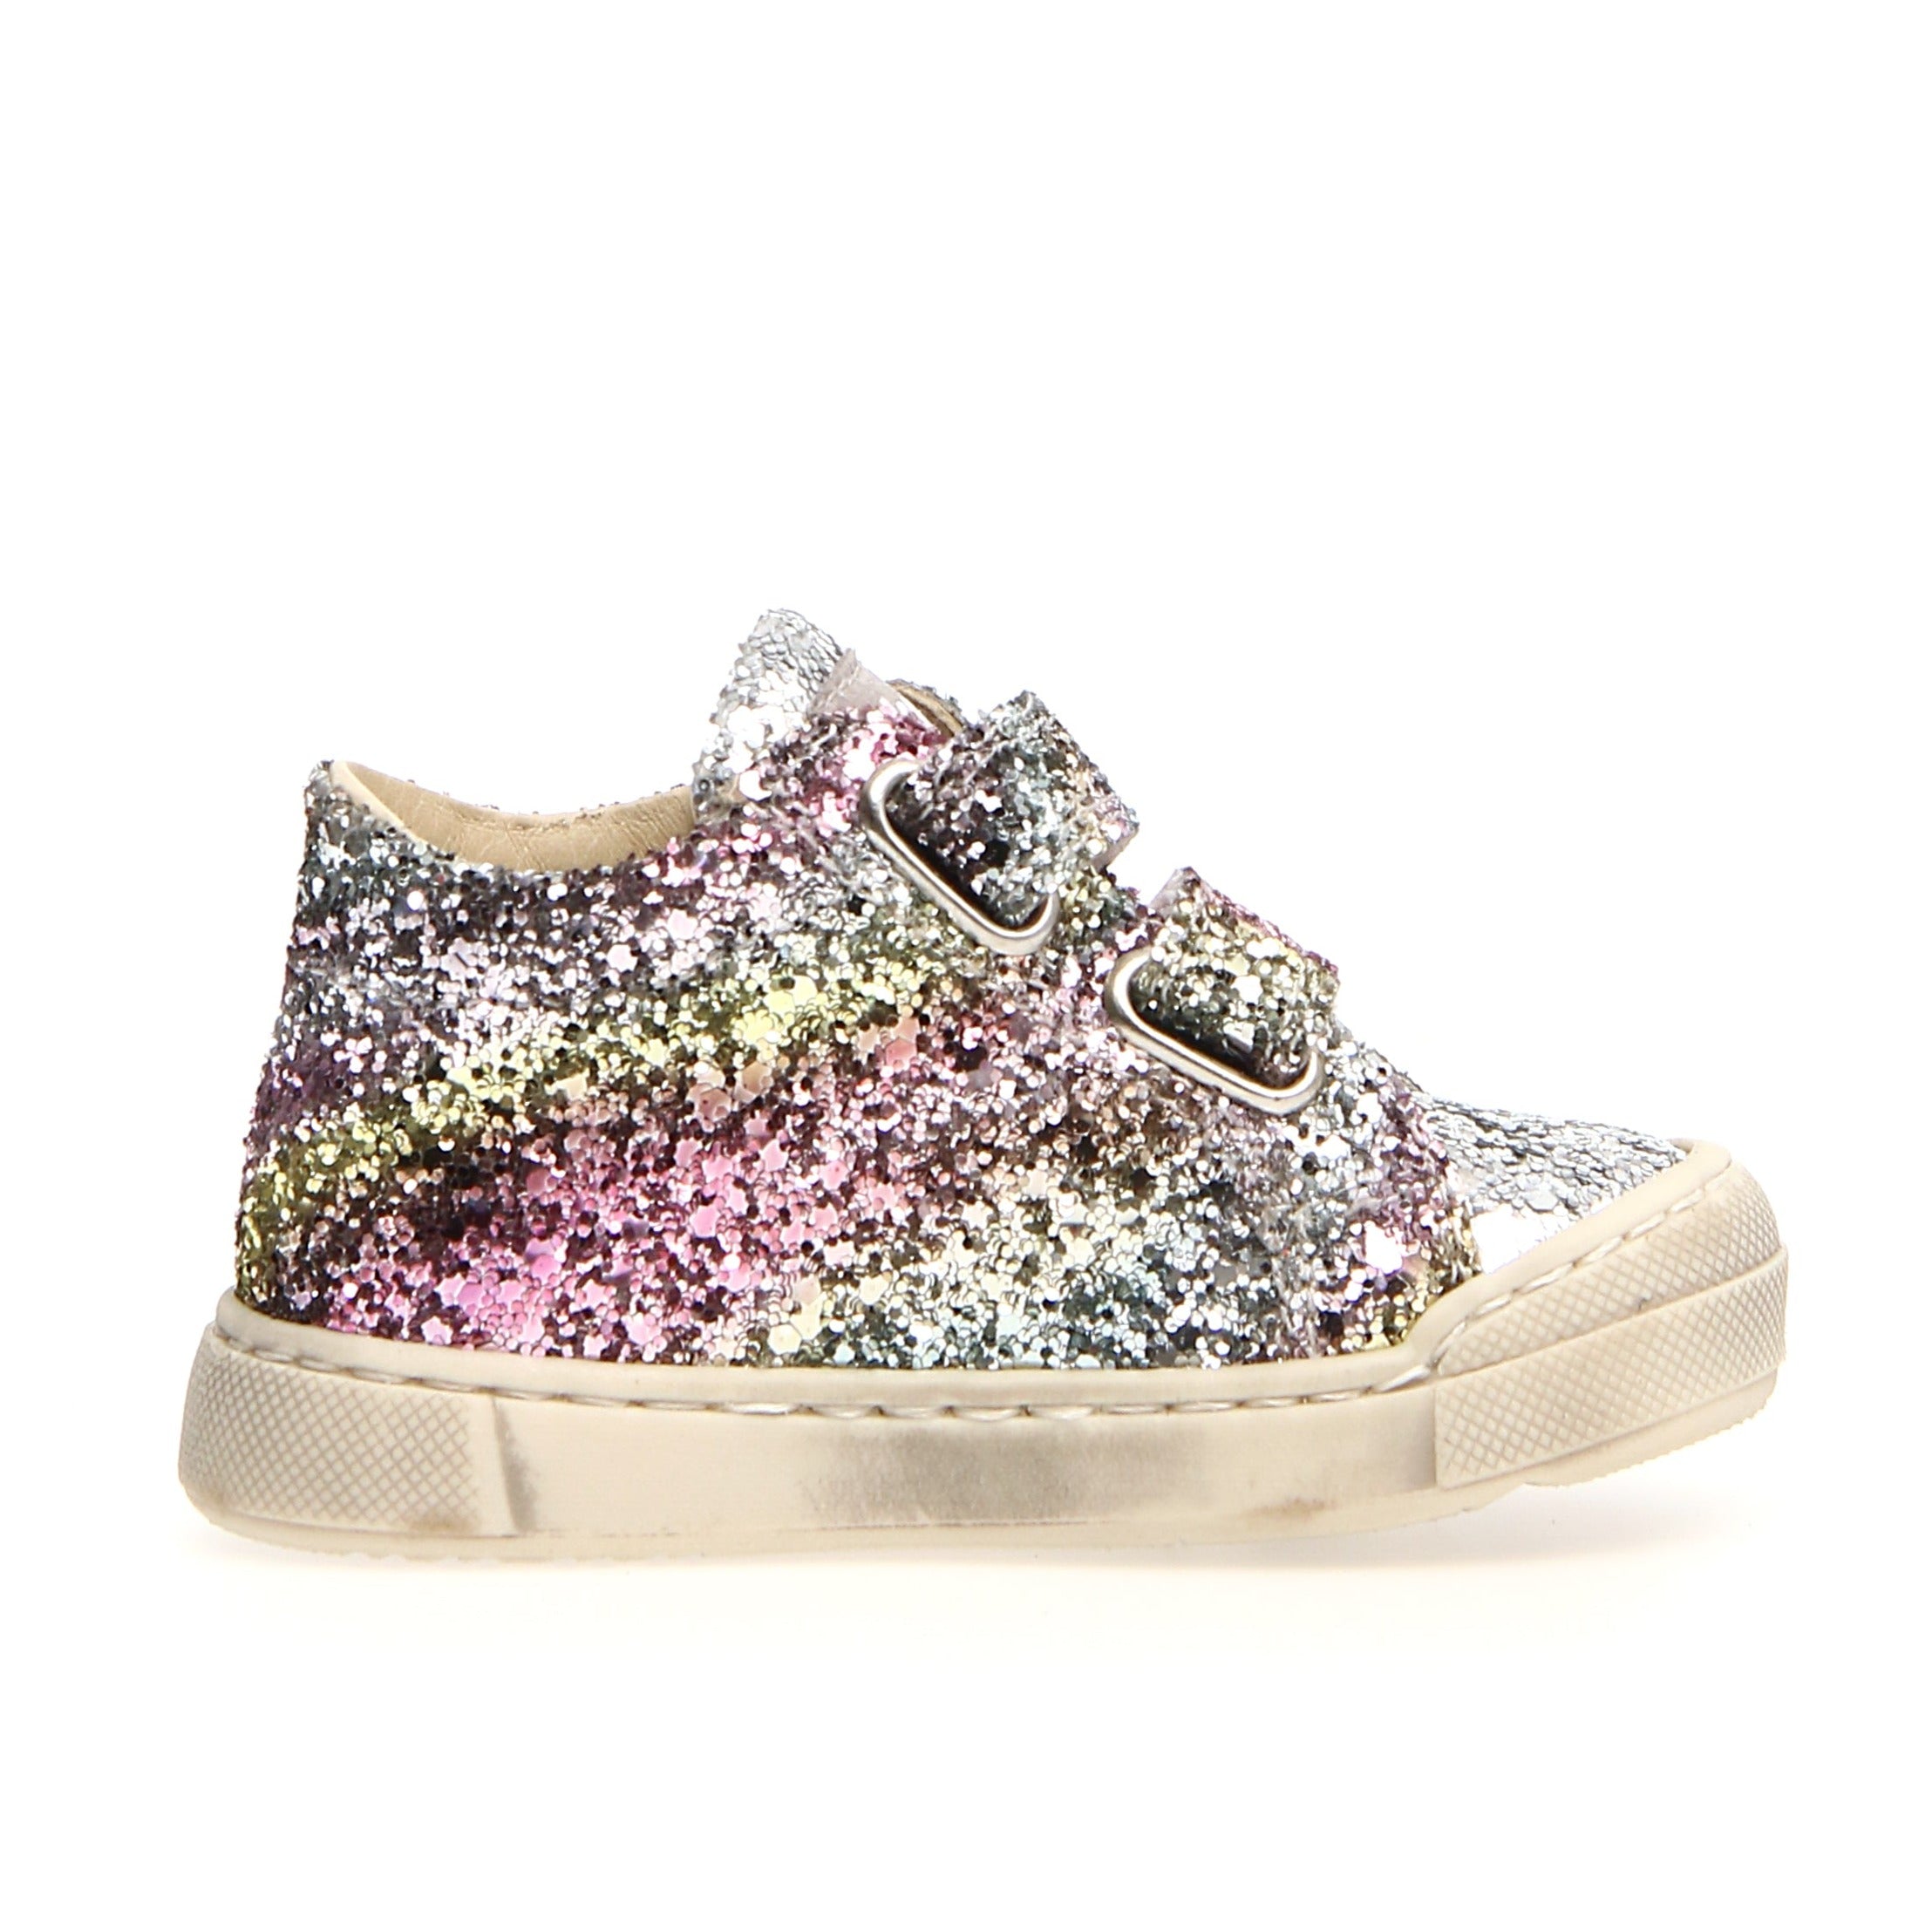 How To: Double Sparkle Non Shedding Glitter Shoes